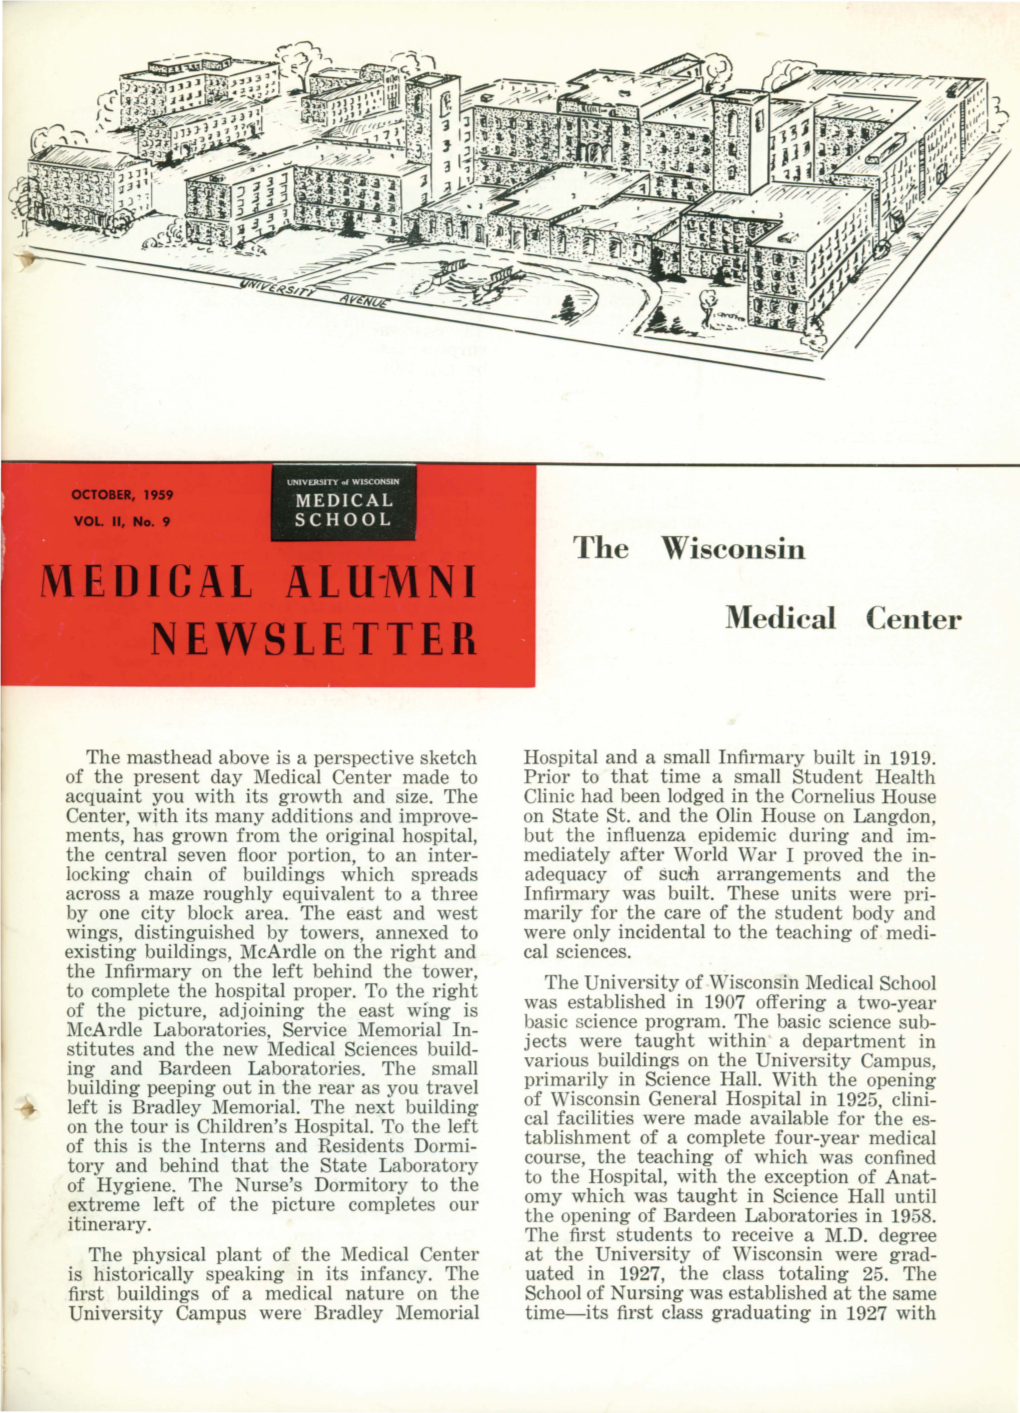 The Wisconsin Medical Center